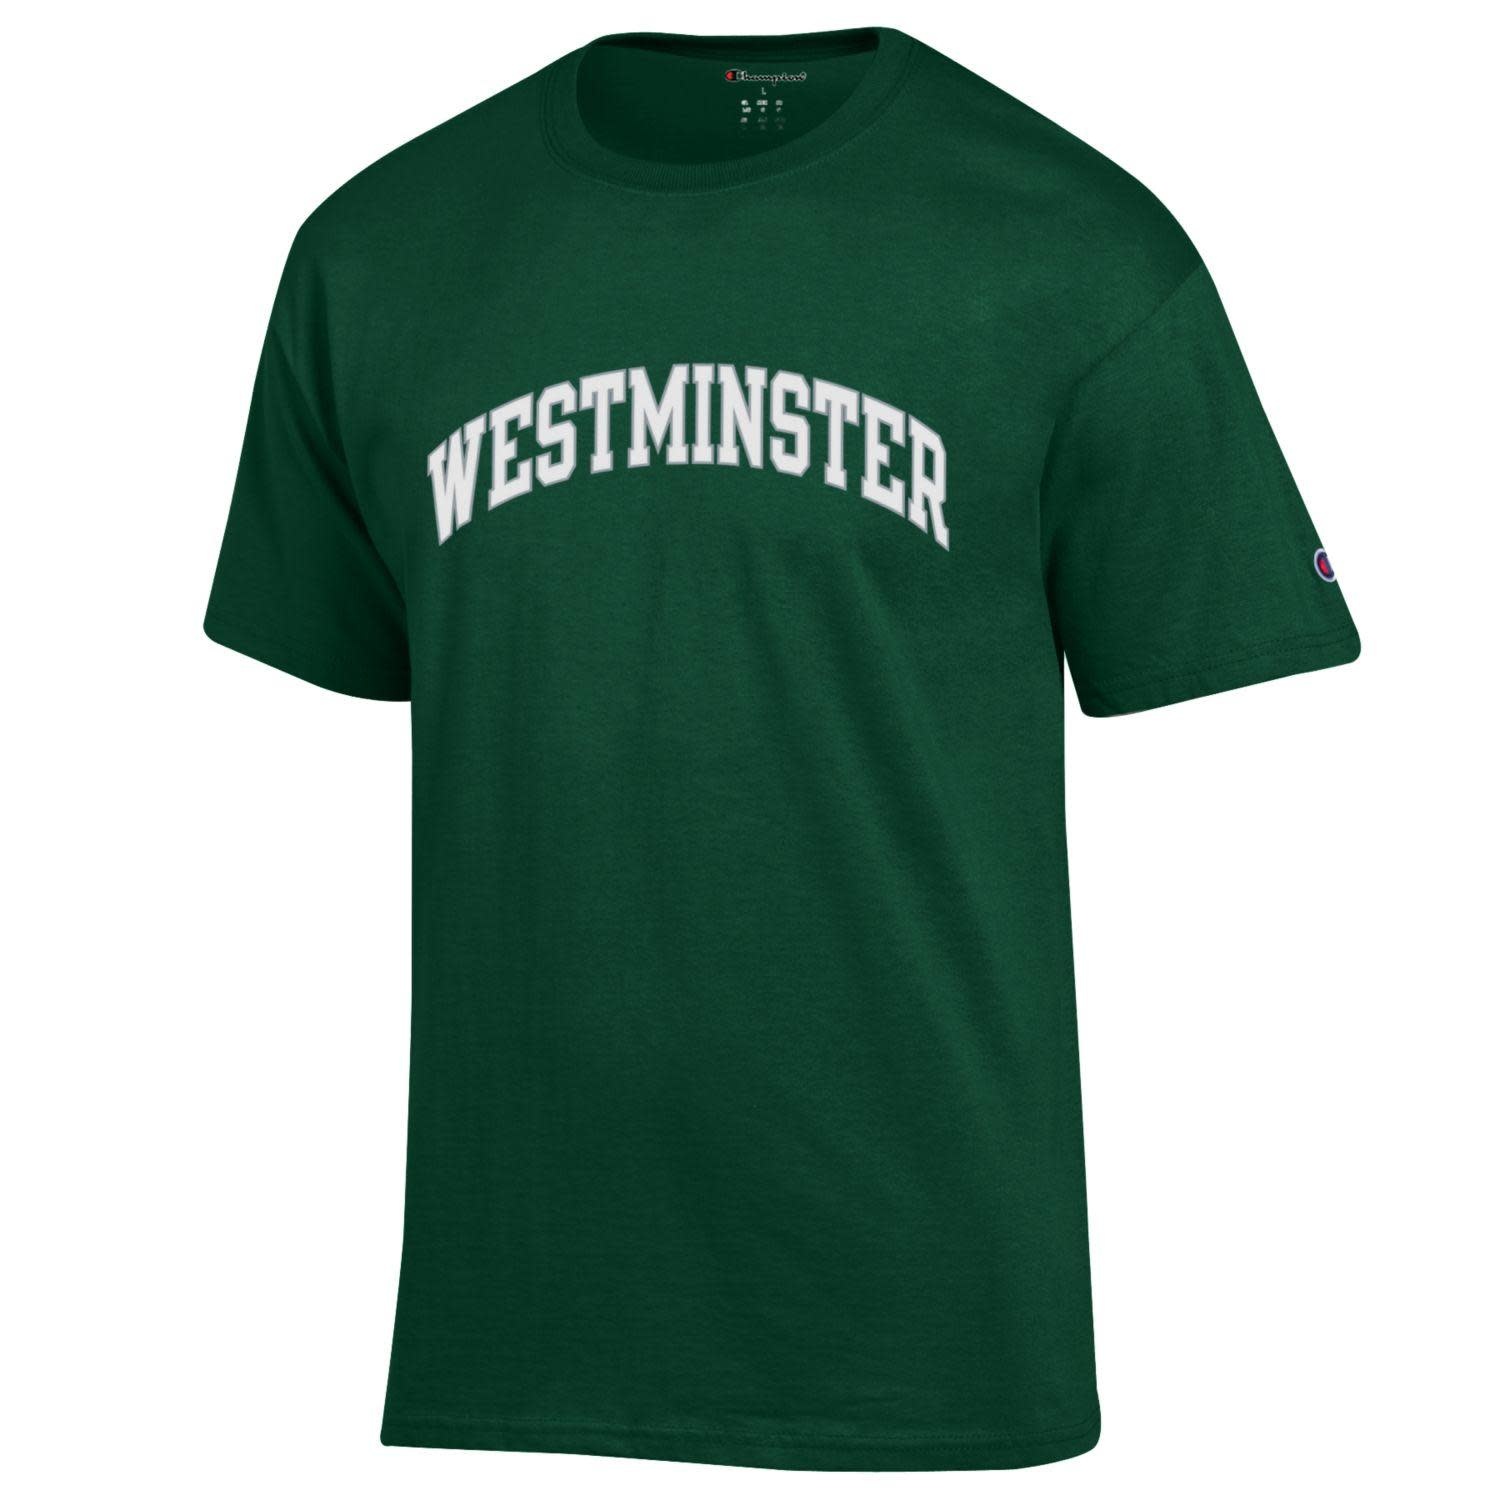 Champion T: Champion Arched Westminster Green